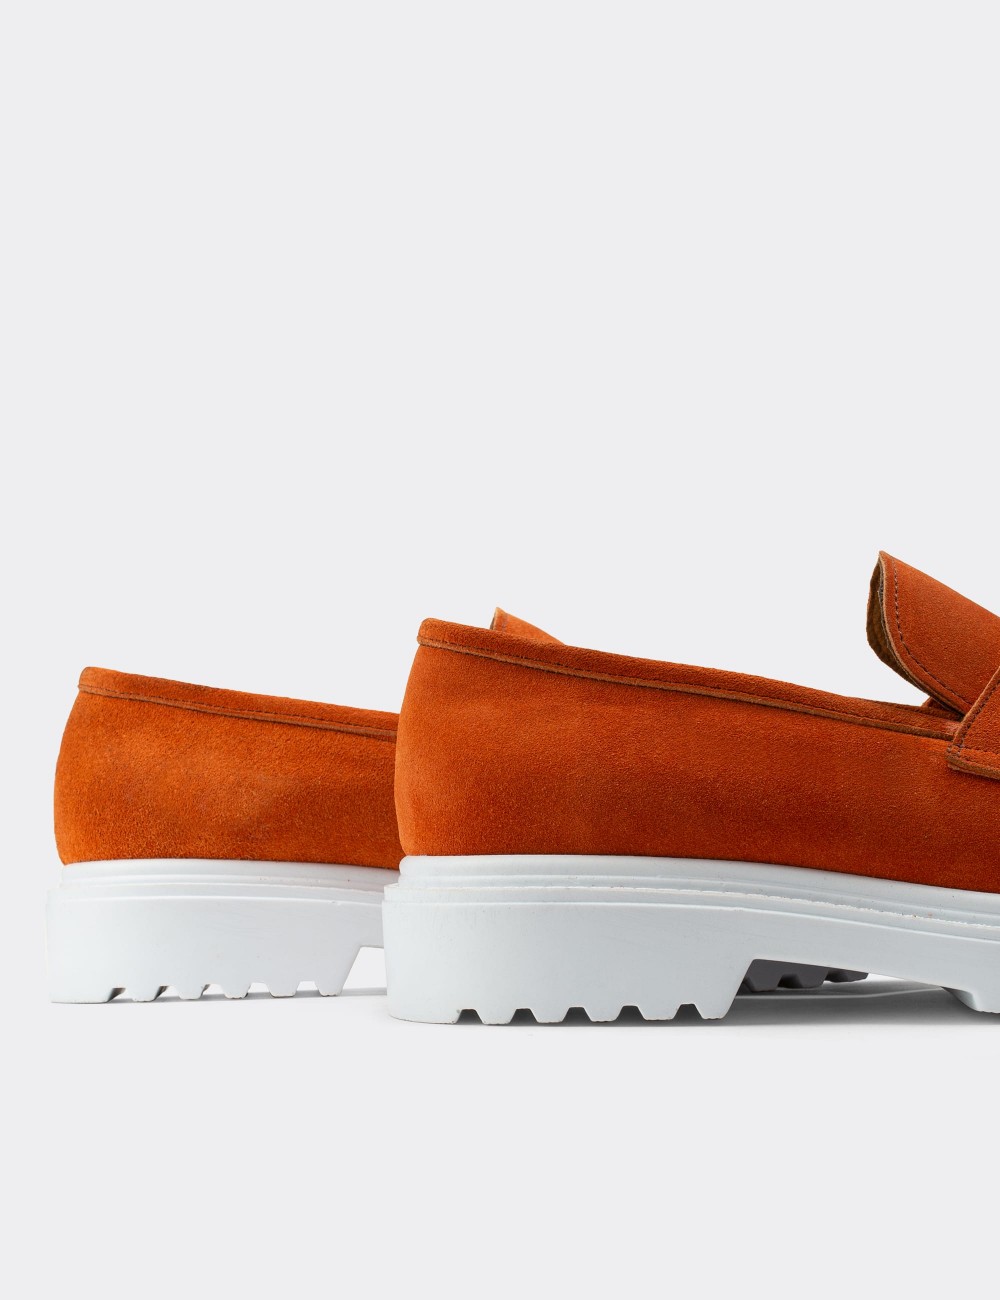 Orange Suede Leather Loafers - 01903ZTRCP01